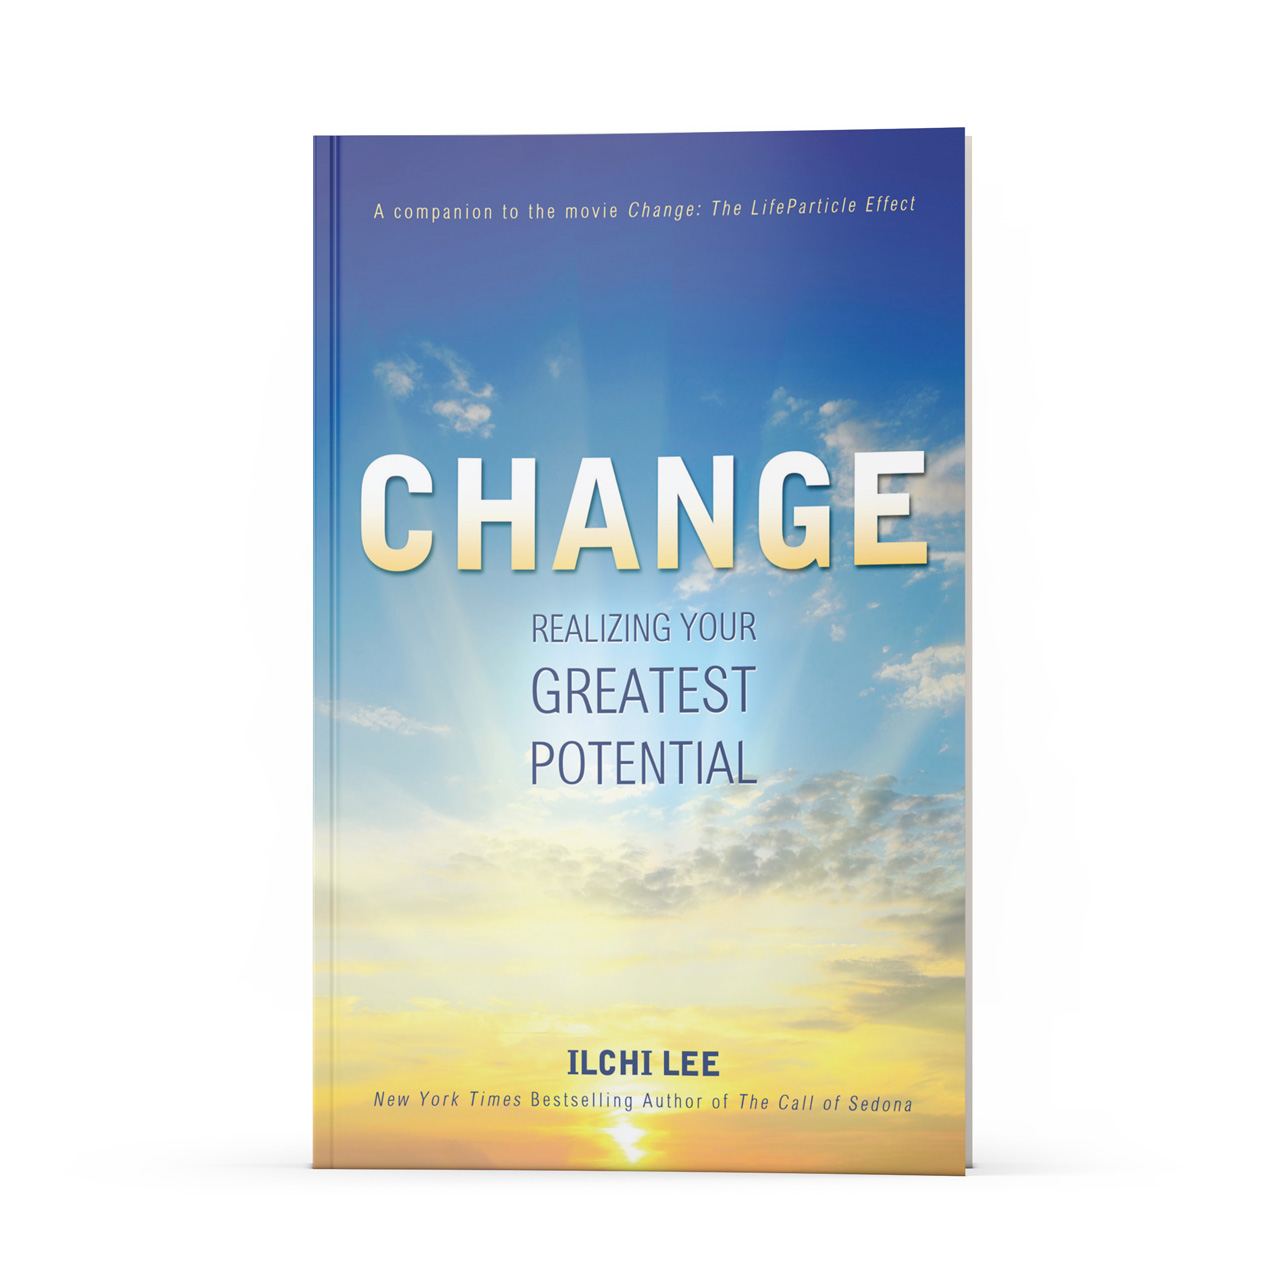 Change: Realizing Your Greatest Potential